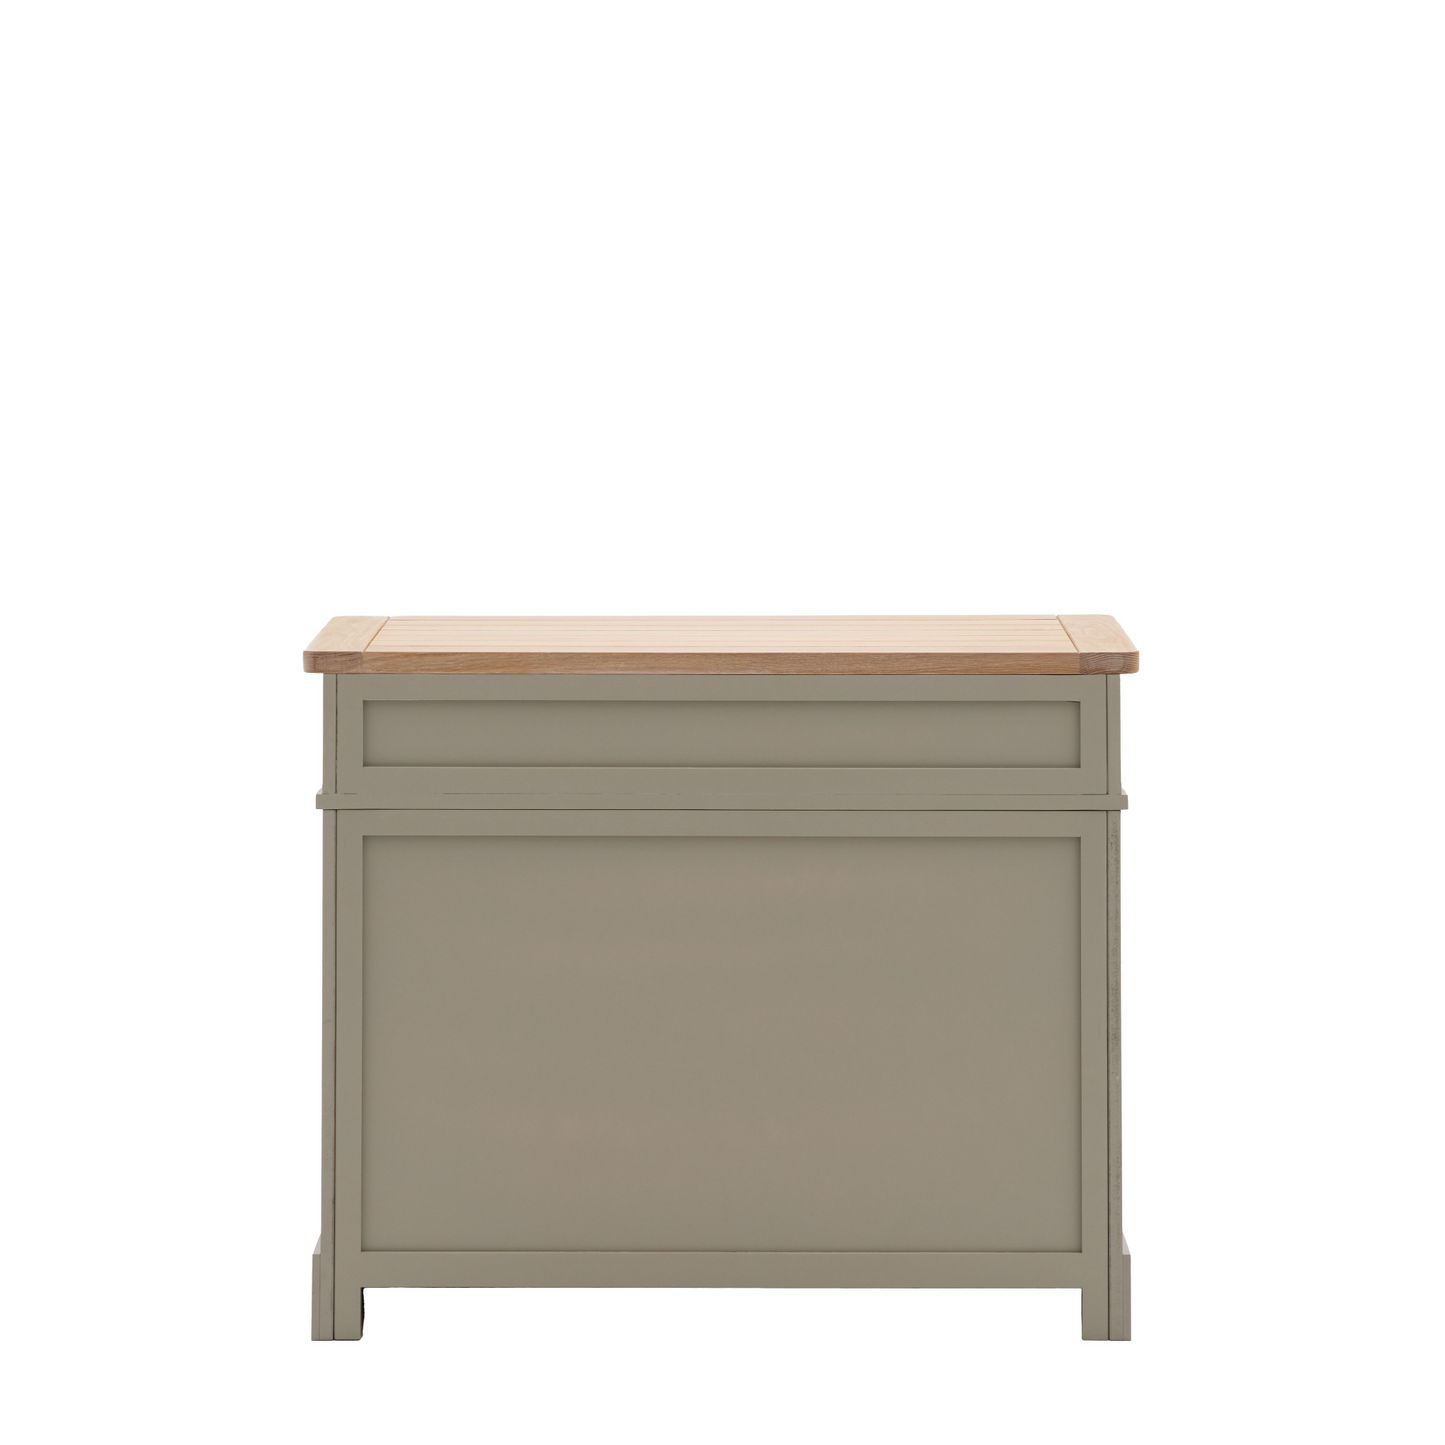 A Buckland 2 Door 1 Drawer Sideboard in Prairie for interior decor.